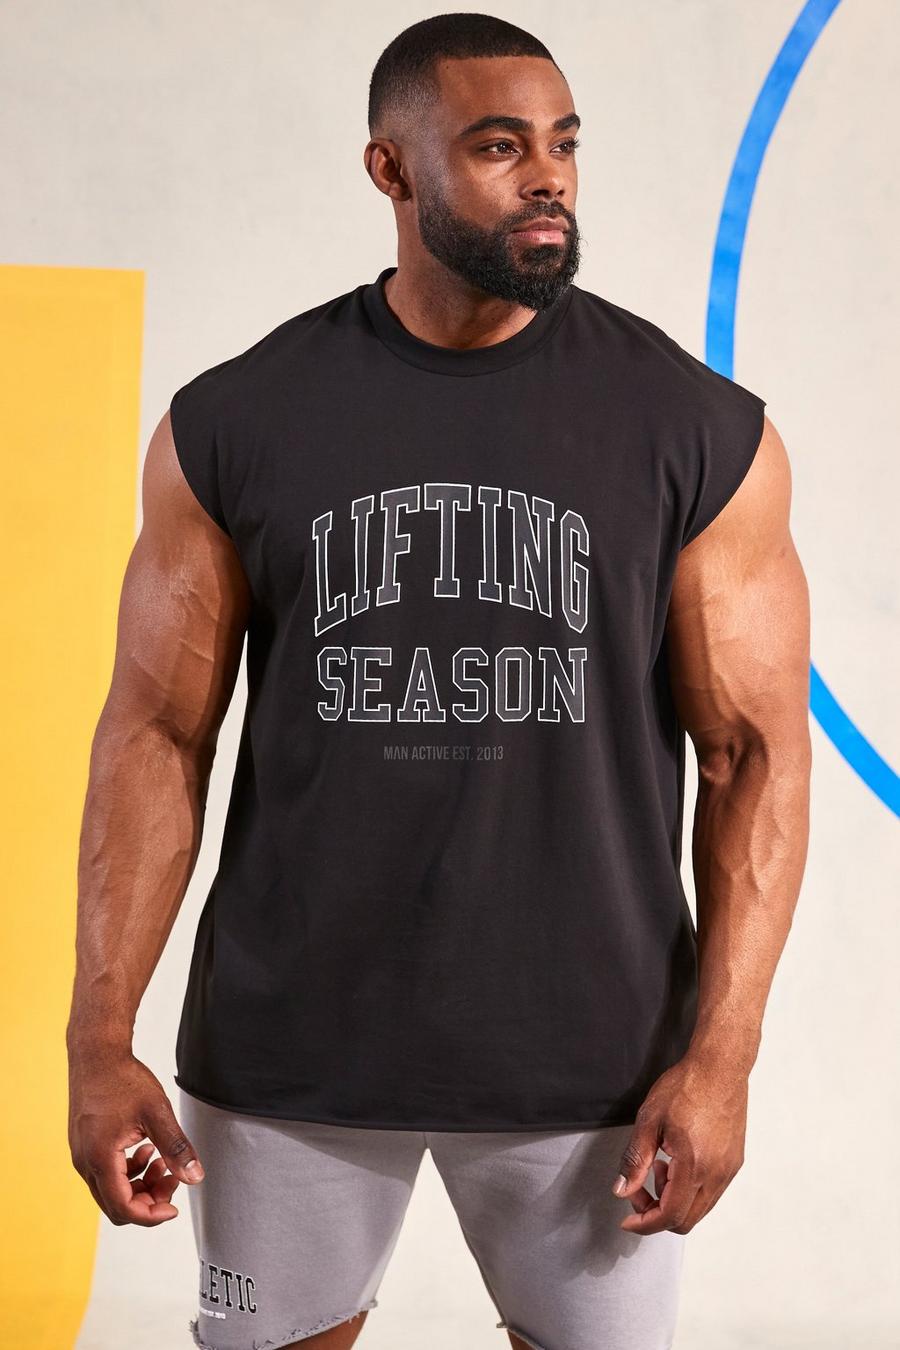 Black Man Active Fitness Athletic T-Shirt 